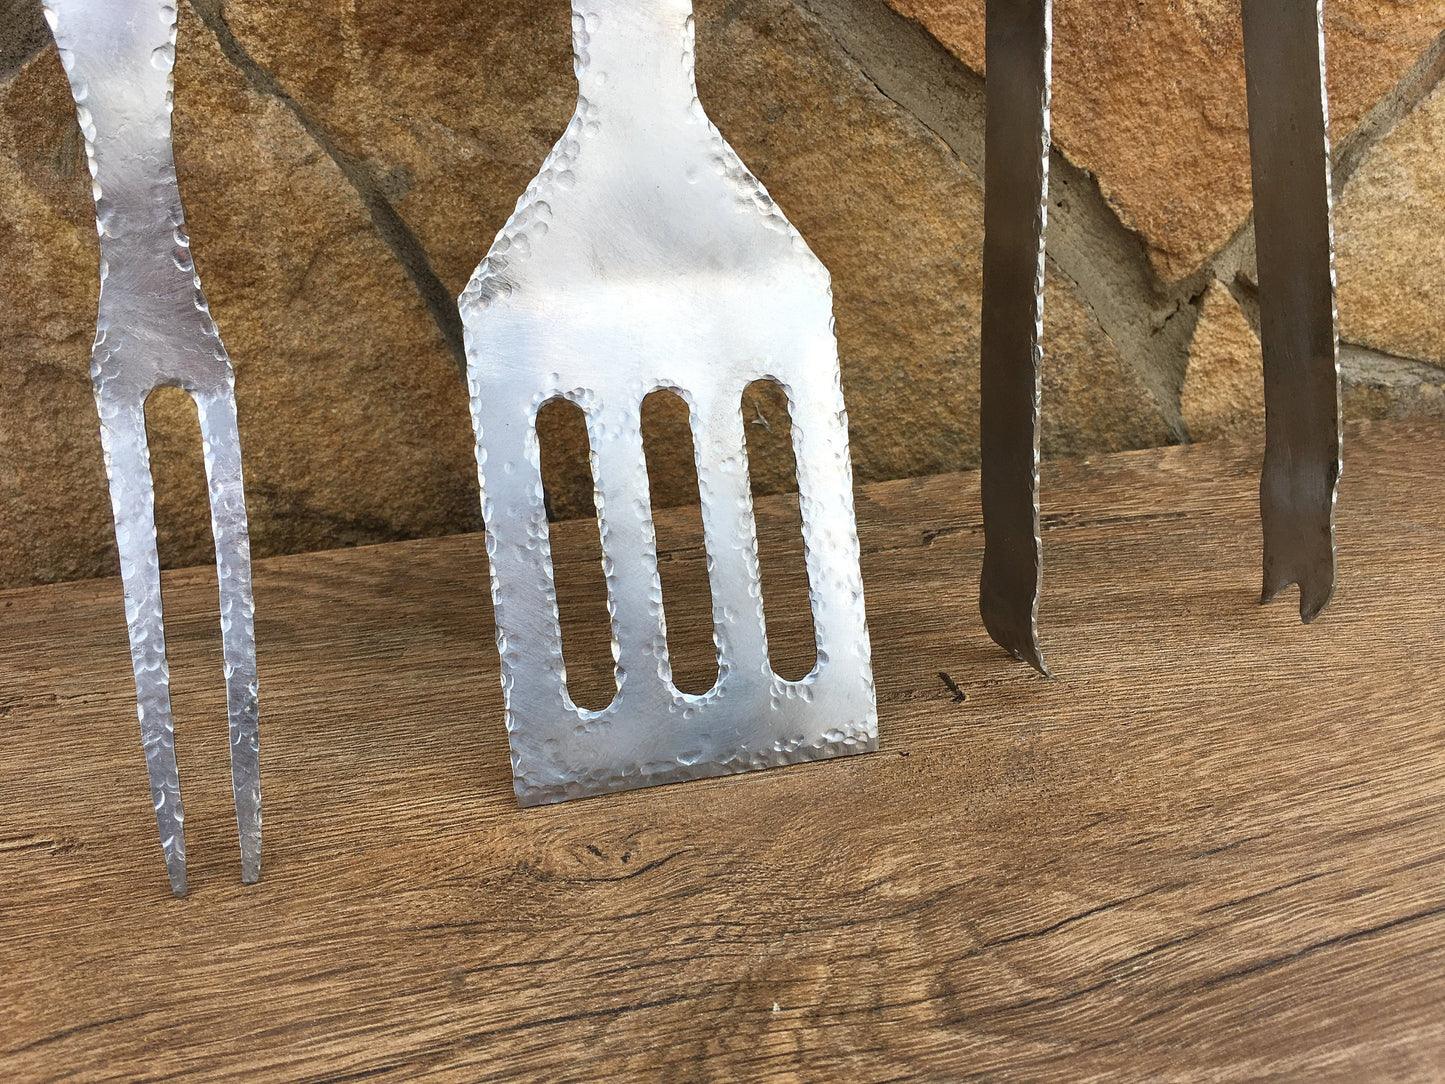 Personalized gift, BBQ tools, grill tools, skewers, 6th anniversary, 11th anniversary, Christmas, birthday, Fathers Day, iron gift, camping